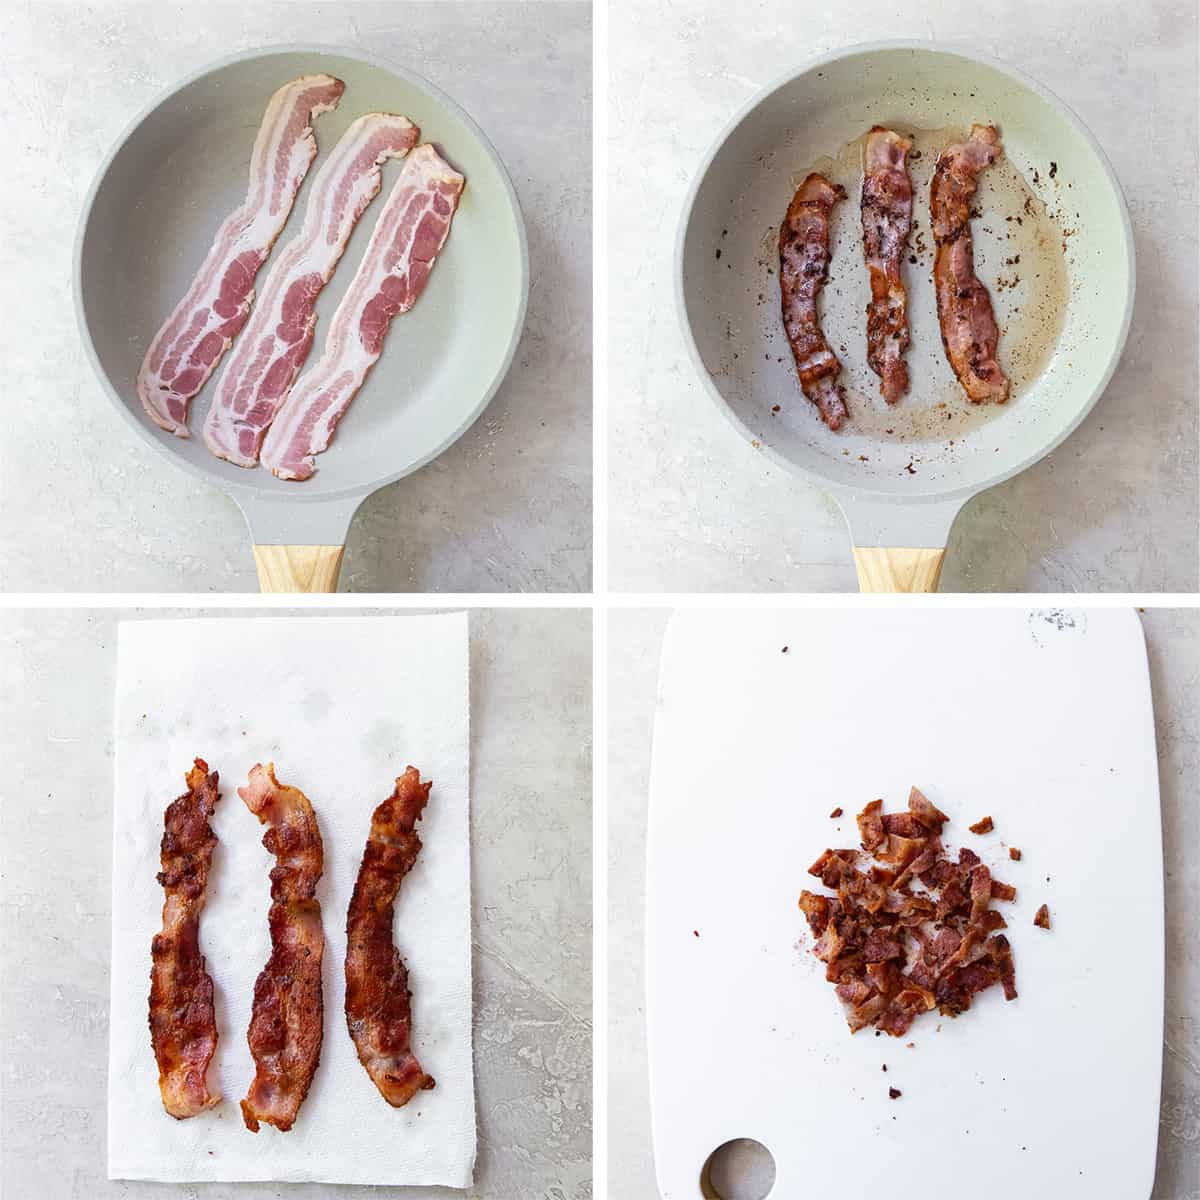 Four images showing bacon in a skillet, on paper towels, and crumbled on a cutting board.